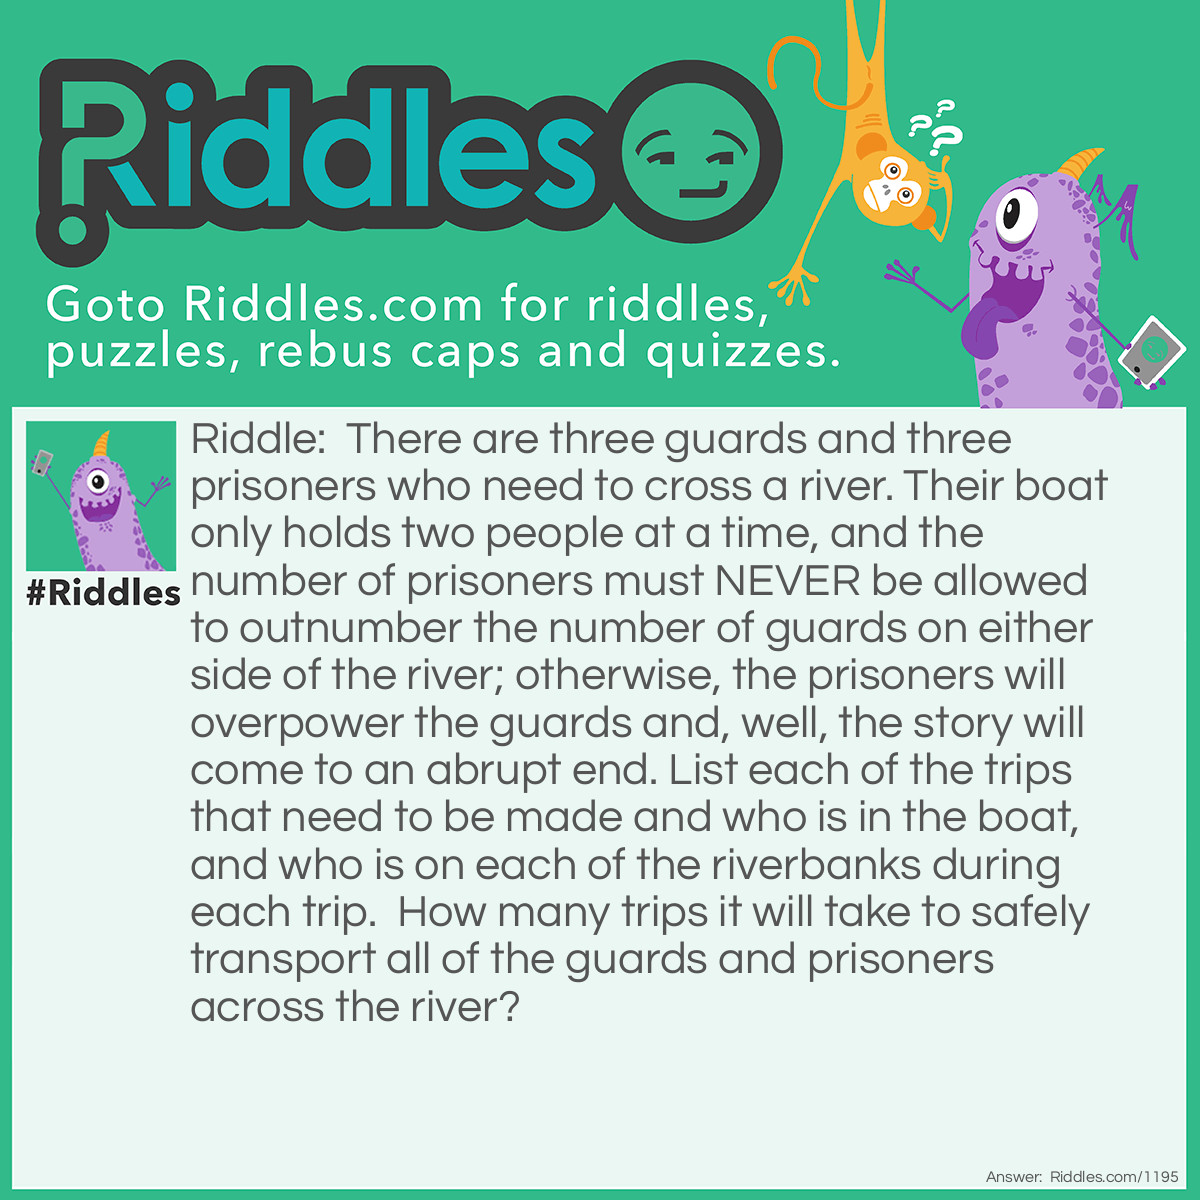 Riddle: There are three guards and three prisoners who need to cross a river. Their boat only holds two people at a time, and the number of prisoners must NEVER be allowed to outnumber the number of guards on either side of the river; otherwise, the prisoners will overpower the guards and, well, the story will come to an abrupt end. List each of the trips that need to be made and who is in the boat, and who is on each of the riverbanks during each trip.  How many trips it will take to safely transport all of the guards and prisoners across the river?  Answer: Saving someone can tell me a way that 2 prisoners, at some point, don't outnumber the guards whether they are just dropping off and still in the boat or actually on land (because even if they are just dropping off and remain in the boat they are still on the other side of the river) I conclude this to be impossible. Please let me know an alternative if you figure one out because I'm stumped.   thanks